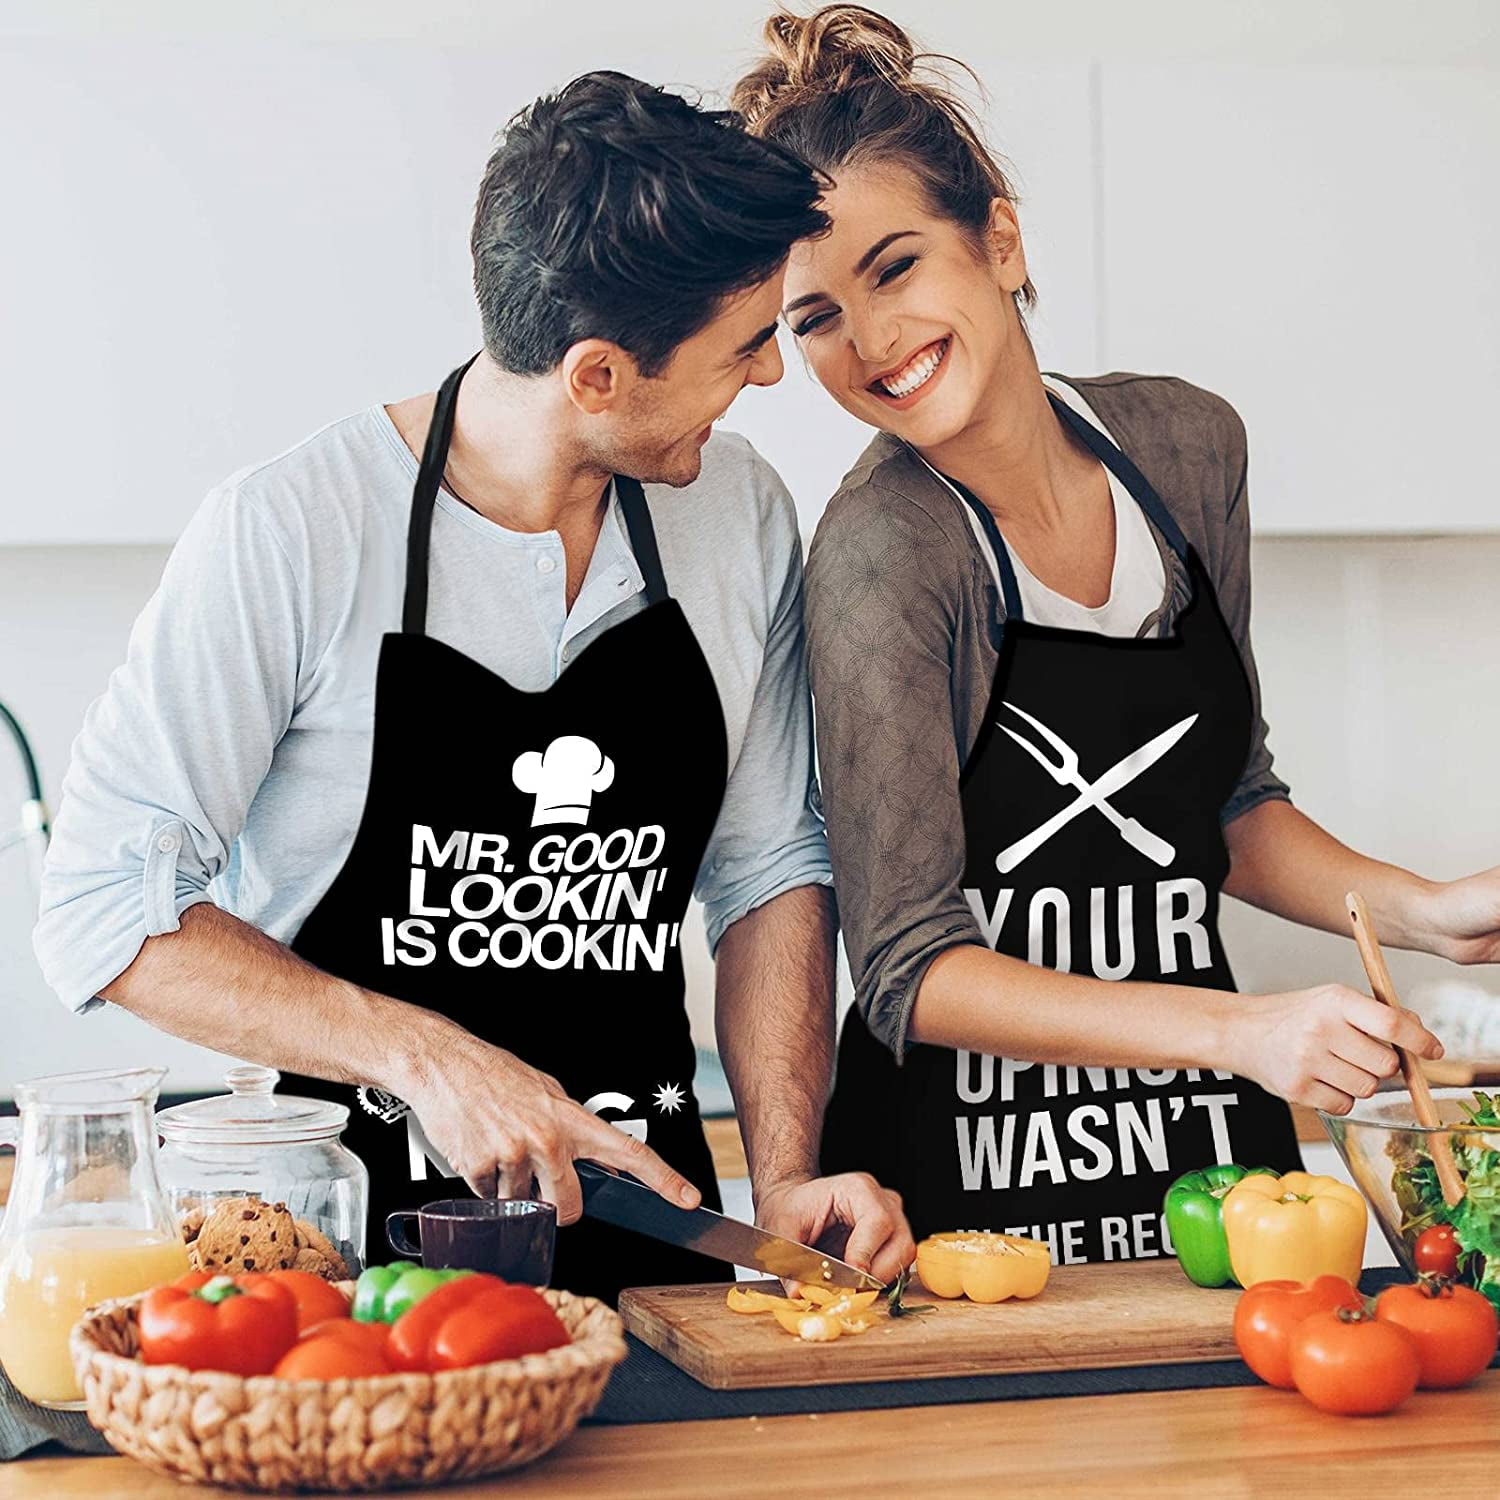 Christmas Gifts For Men, Women, Father's Day Gifts, Gifts for Dad, Husband,  Boyfriend, Brother, Mom, Wife, Girlfriend, Unique Birthday Gifts, Humor  Apron for friends,Bff, Kitchen Chef Aprons Baking Gifts